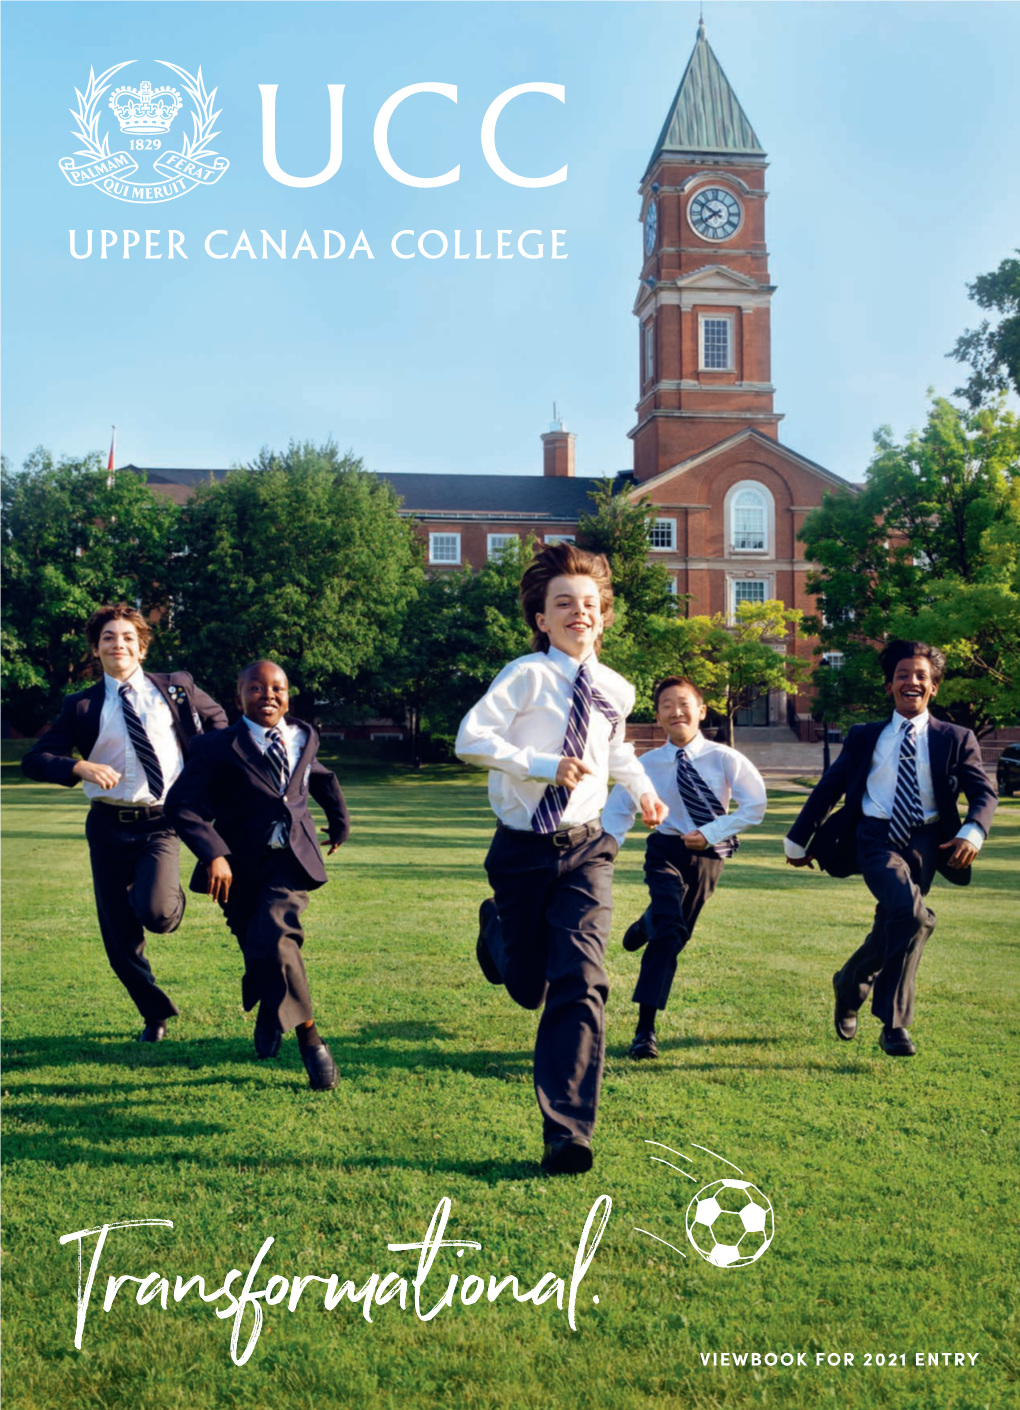 VIEWBOOK for 2021 ENTRY Opportunities Abound at UCC We Offer Transformational Learning Experiences at Upper Canada College